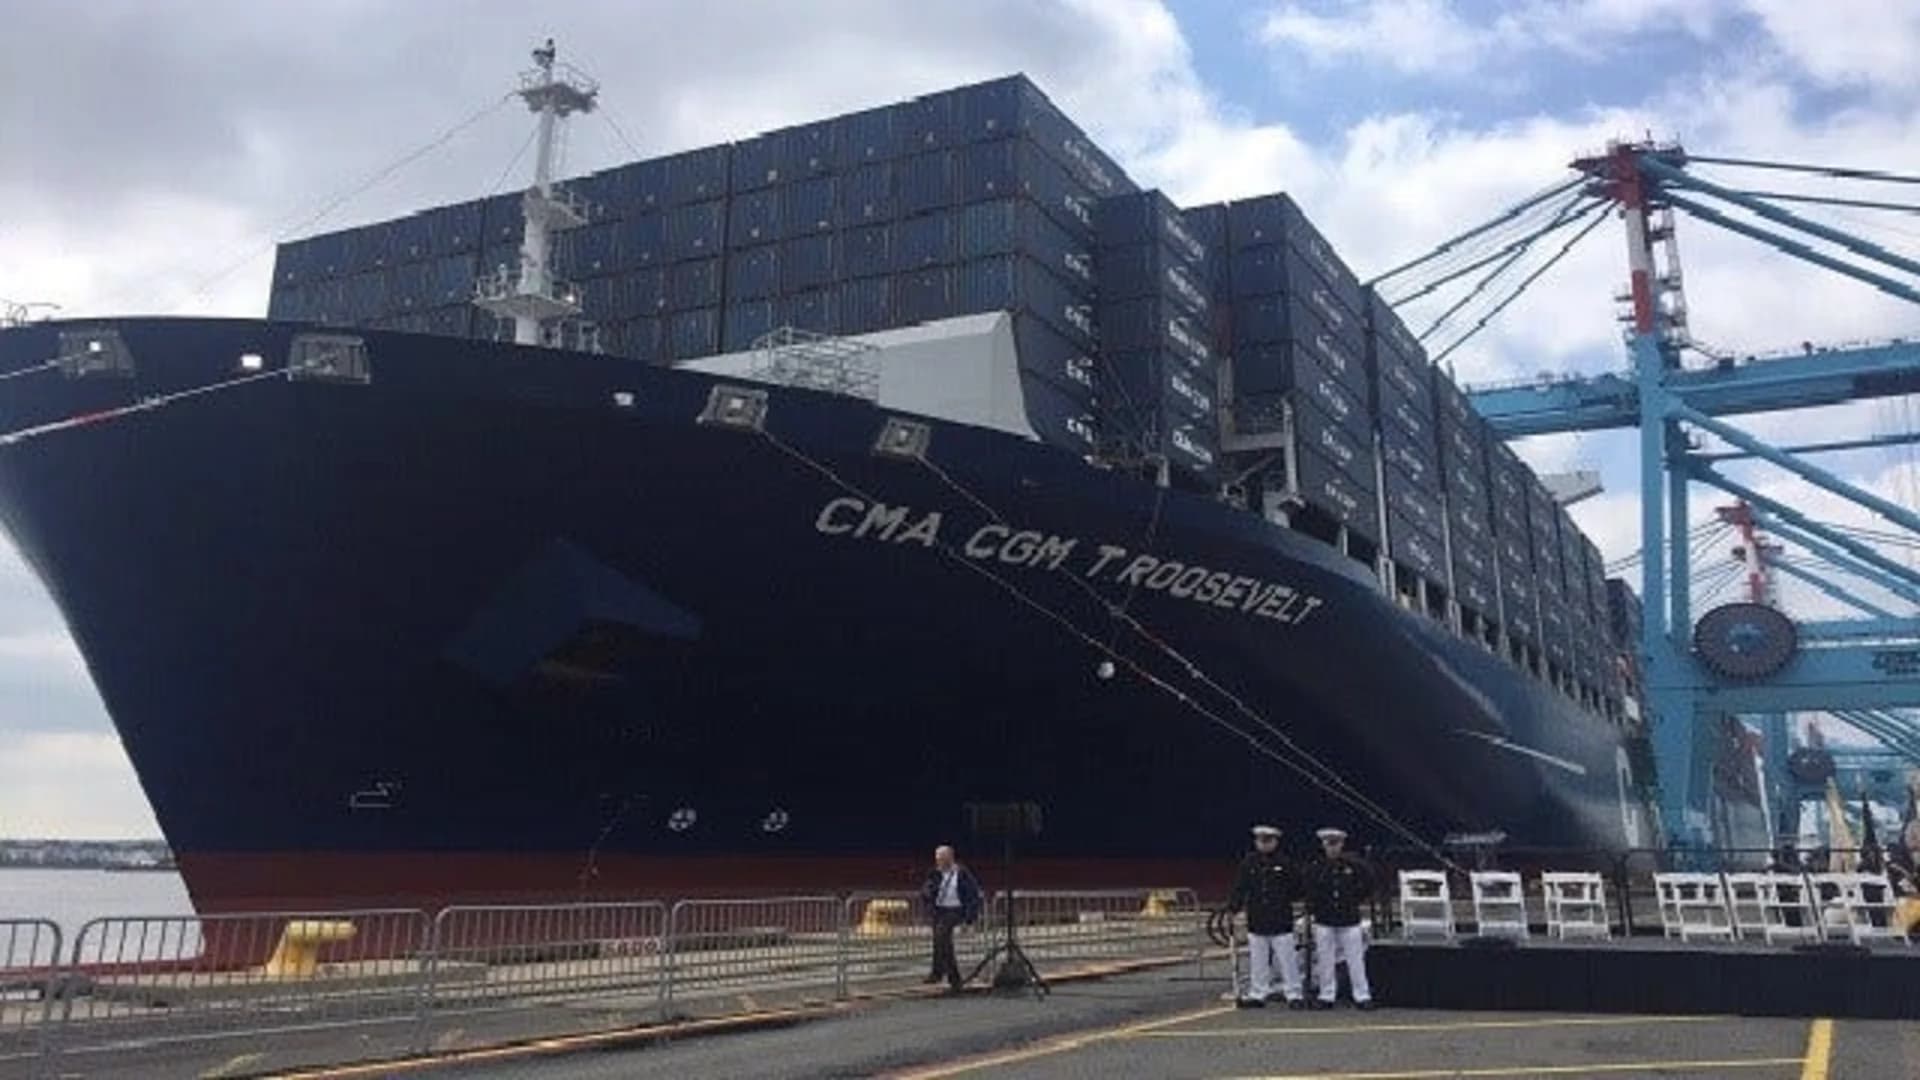 Largest-capacity container ship visits New Jersey port